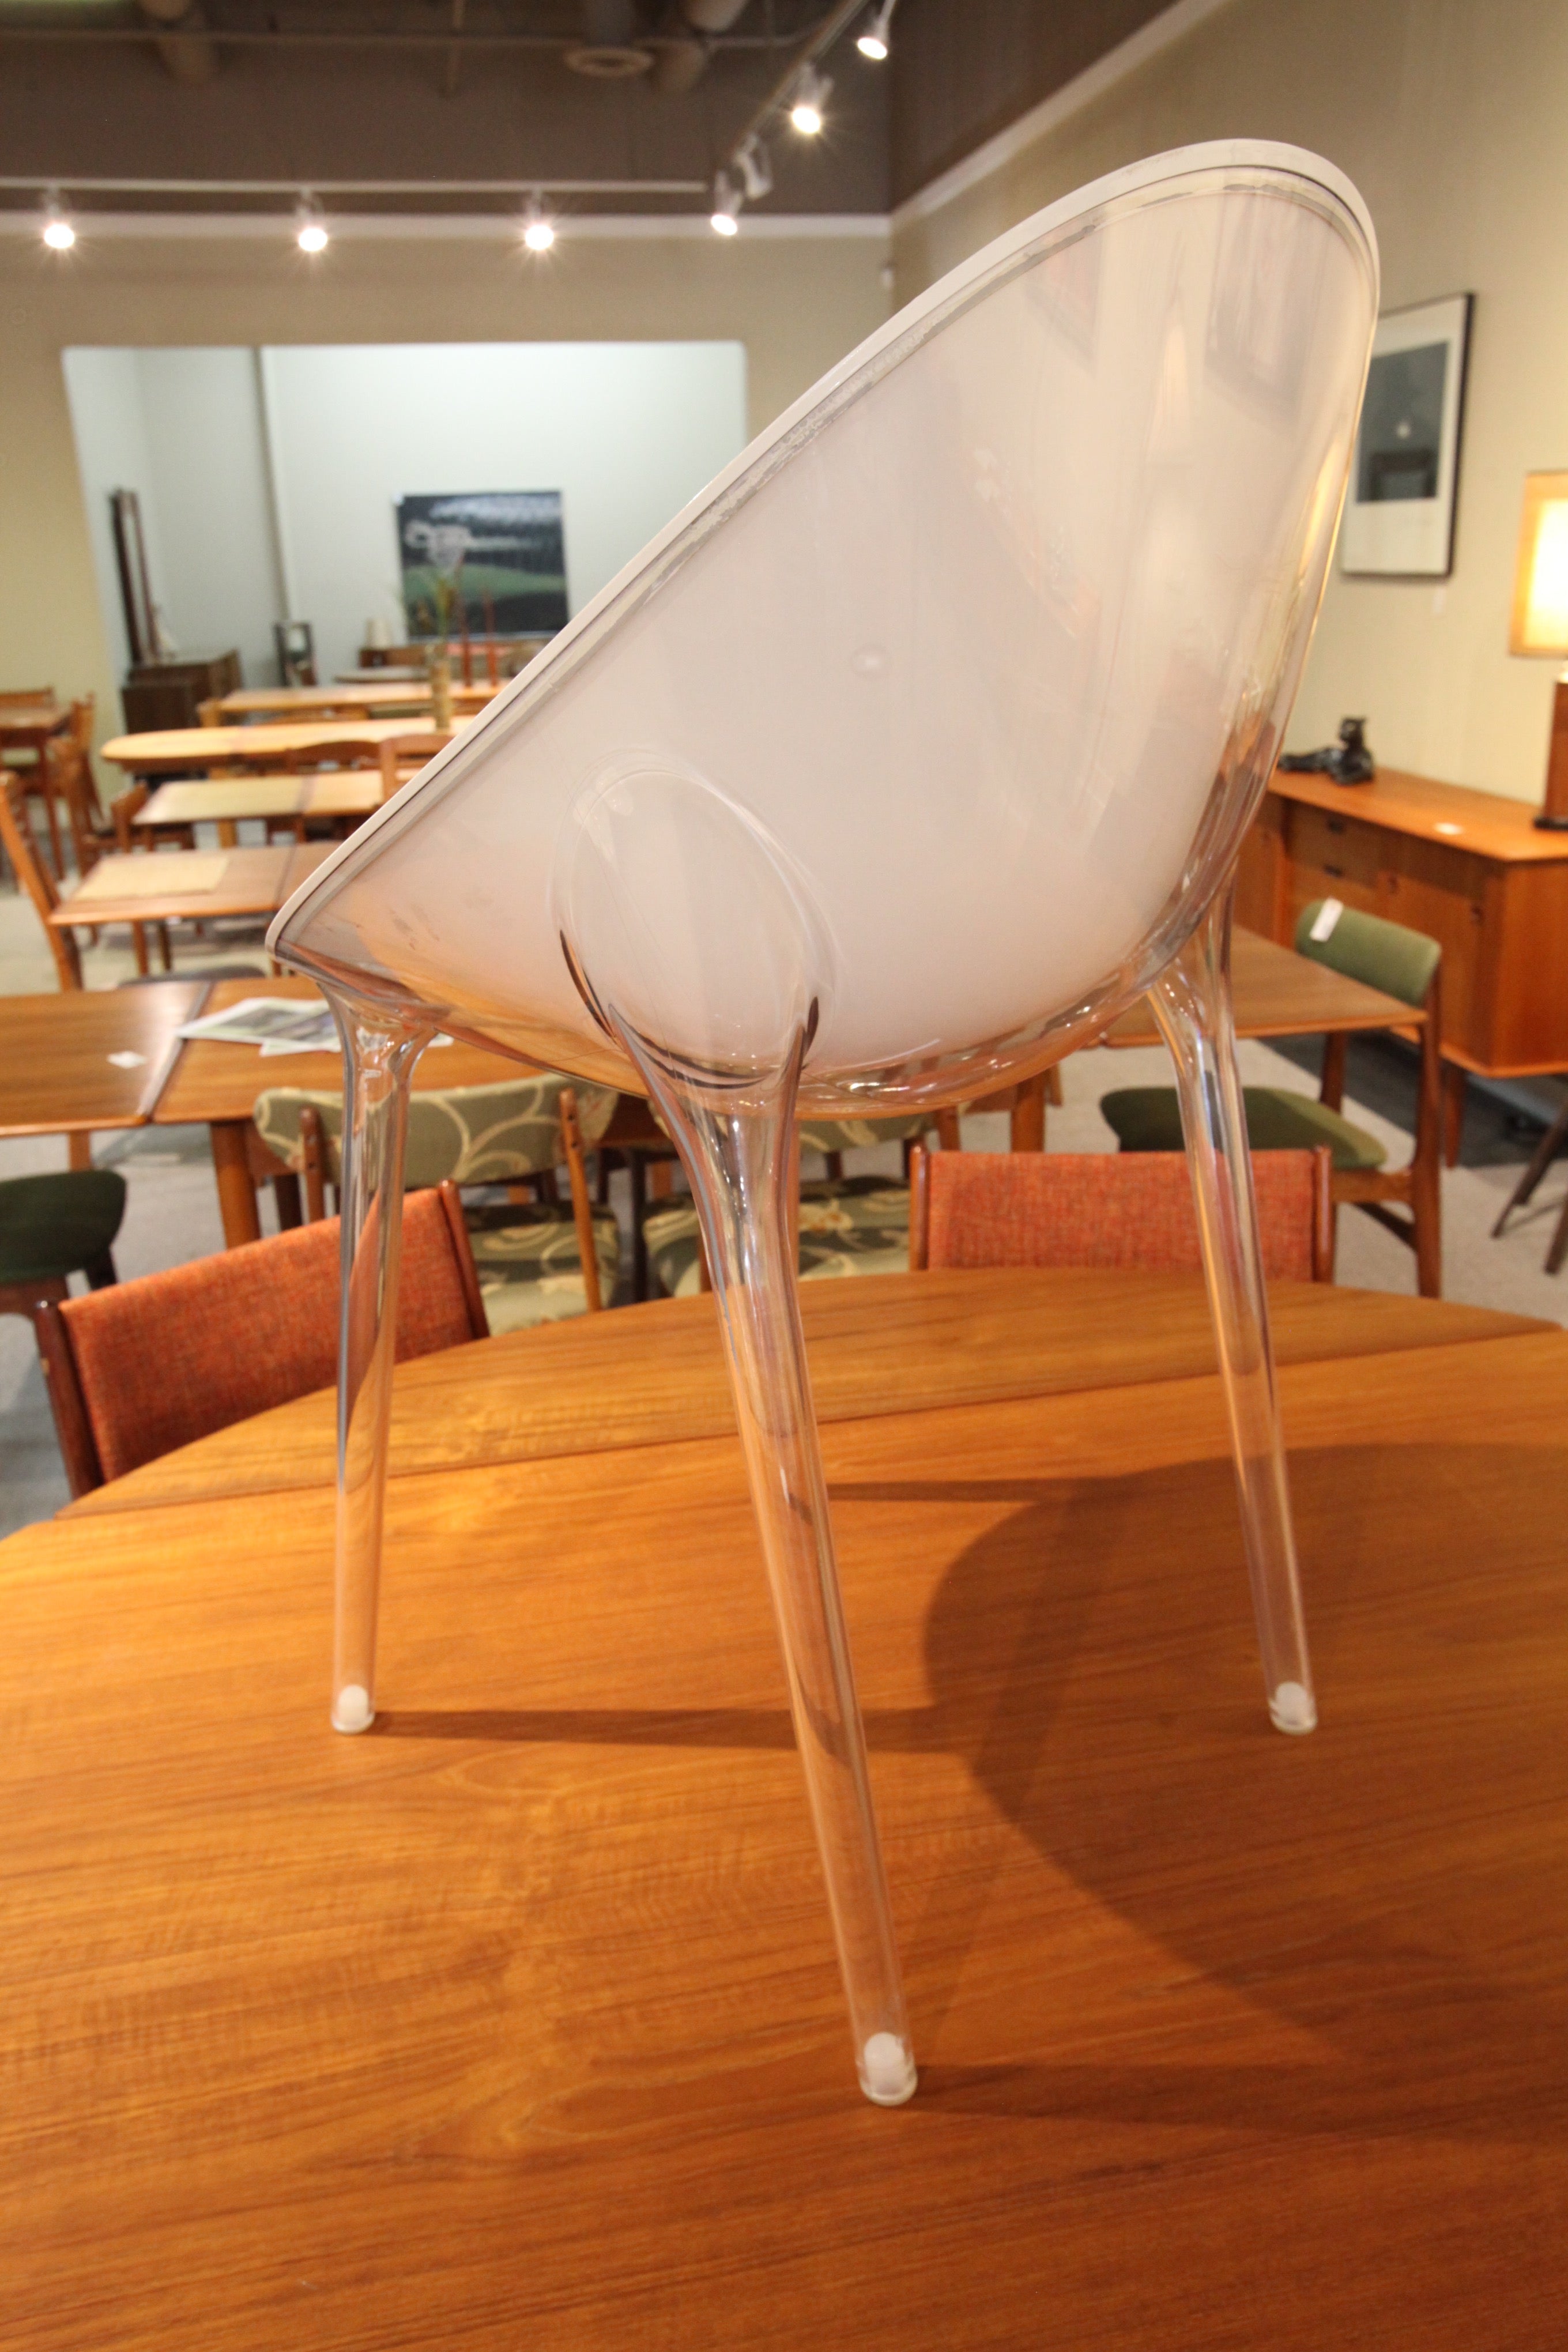 "Mr. Impossible" Chair by Kartell (Glossy Opaque White)